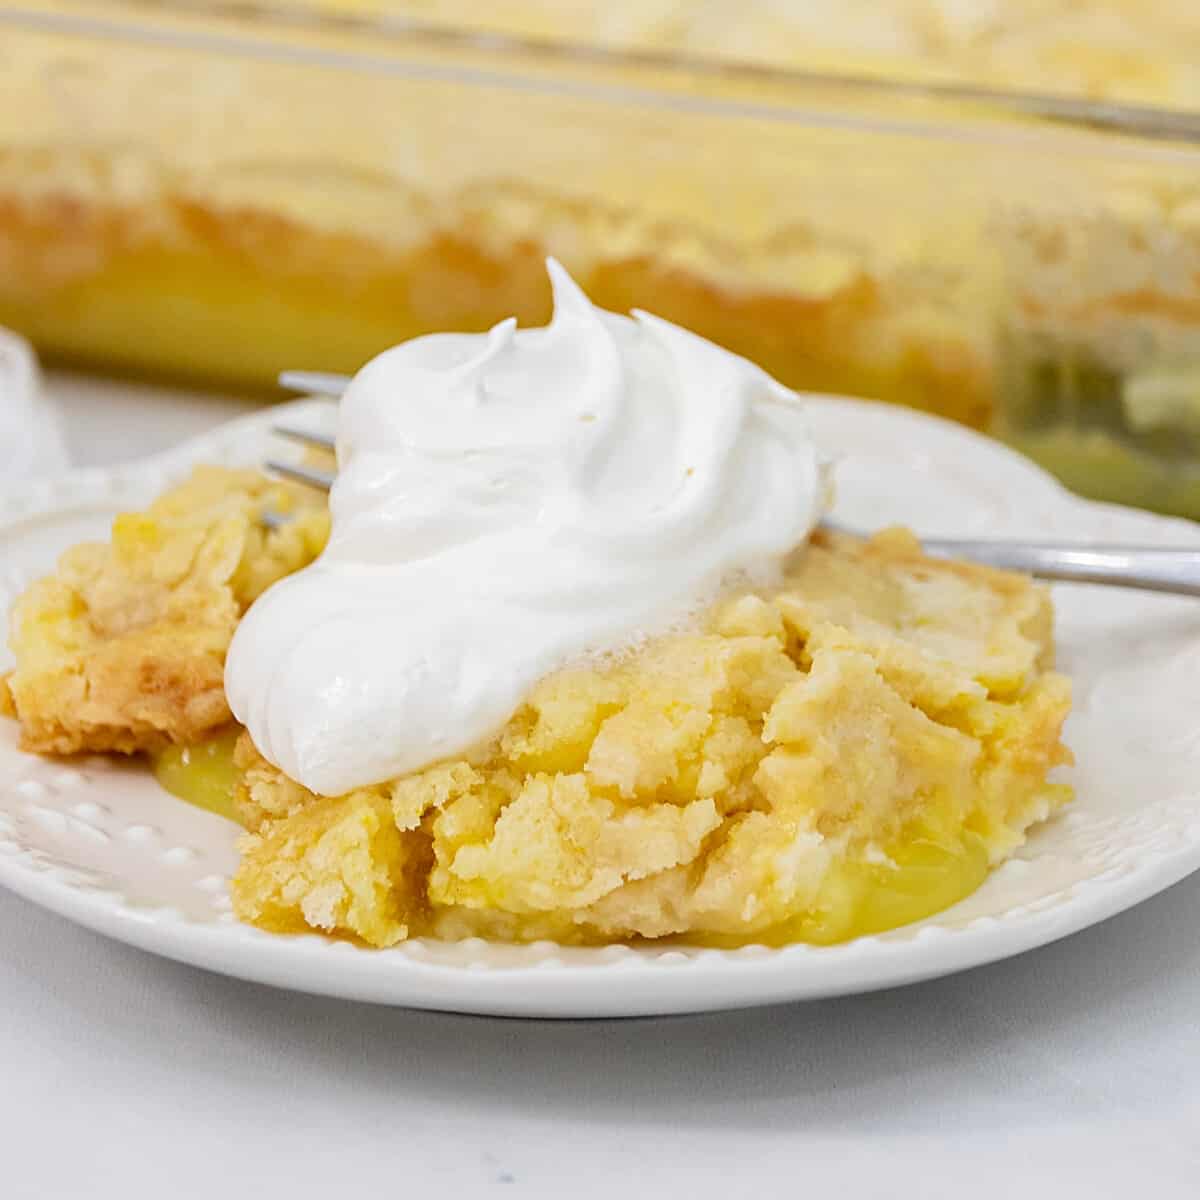 Featured image of lemon cake with cake mix and lemon filling with whipped cream.